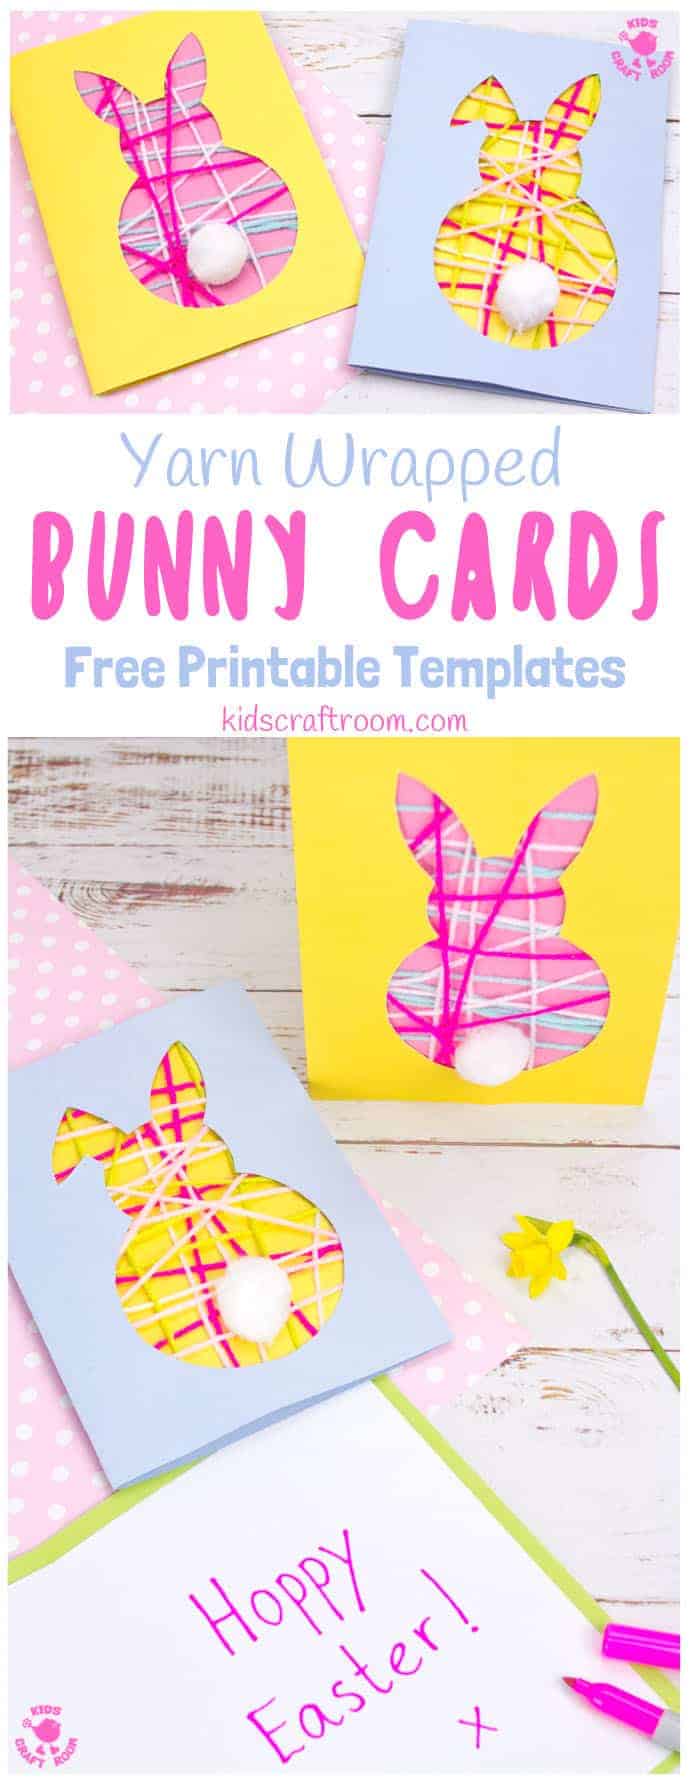 These pretty Yarn Wrapped Easter Bunny Cards are super cute and very easy to make. They're great fun as an Easter craft for kids that lets them practise their fine motor skills too. This easy Easter Bunny craft is adorable as wall decorations super cute Bunny Easter Cards to share with friends. (Free printable templates included) #kidscraftroom #easter #eastercrafts #eastercraftsforkids #easterbunny #eastercards #bunny #printablesforkids #freeprintables #kidscrafts #springcrafts 